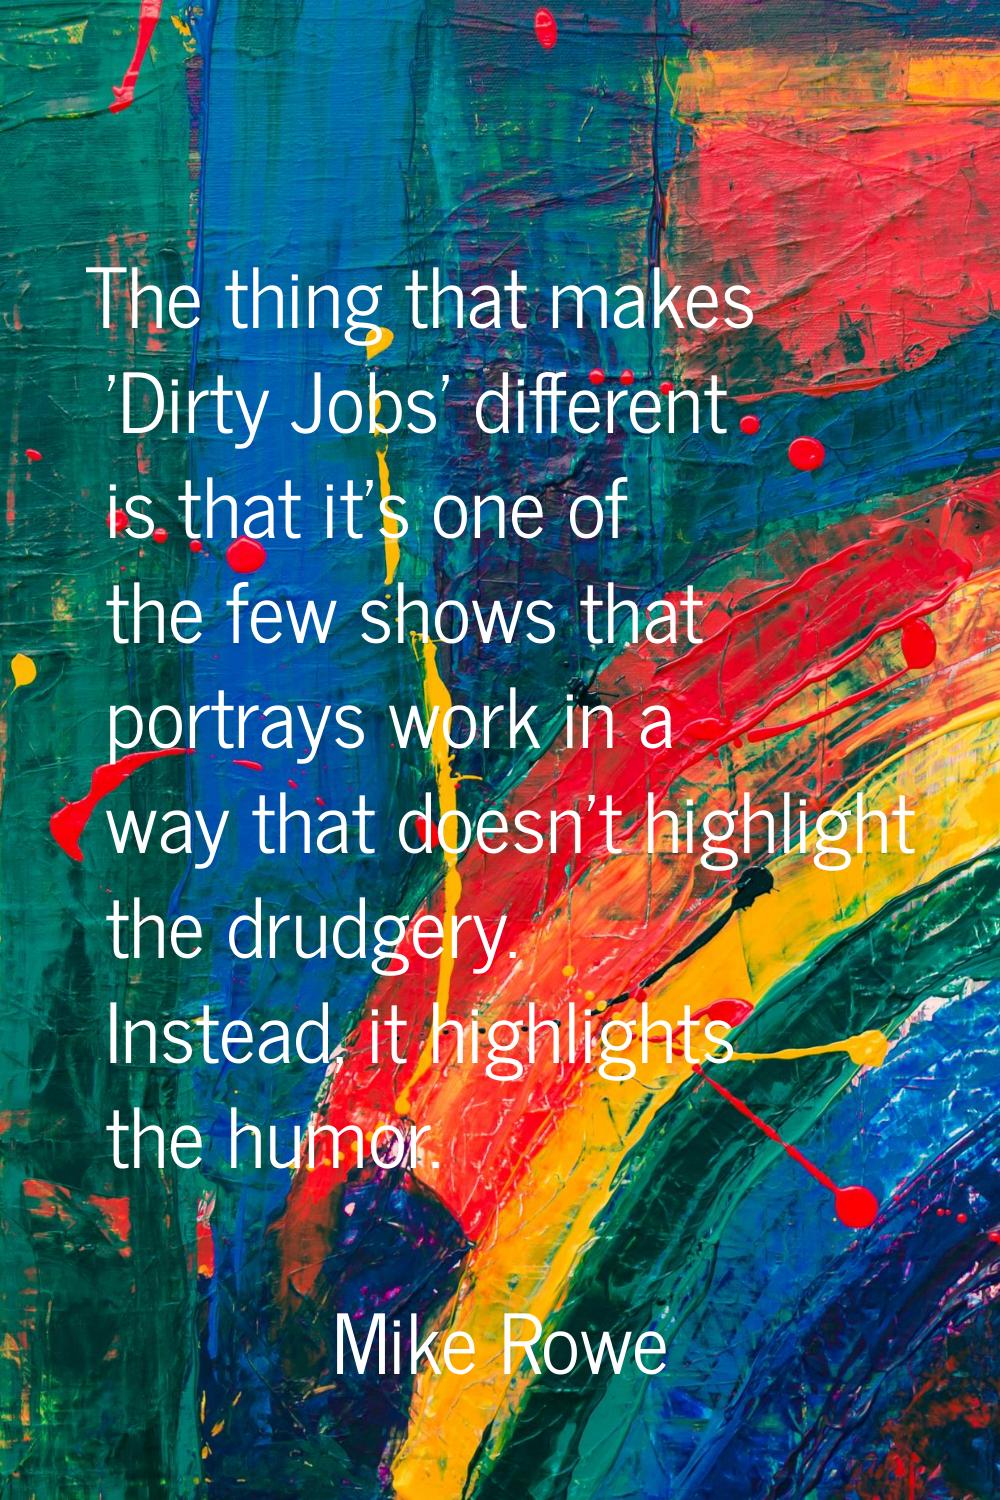 The thing that makes 'Dirty Jobs' different is that it's one of the few shows that portrays work in